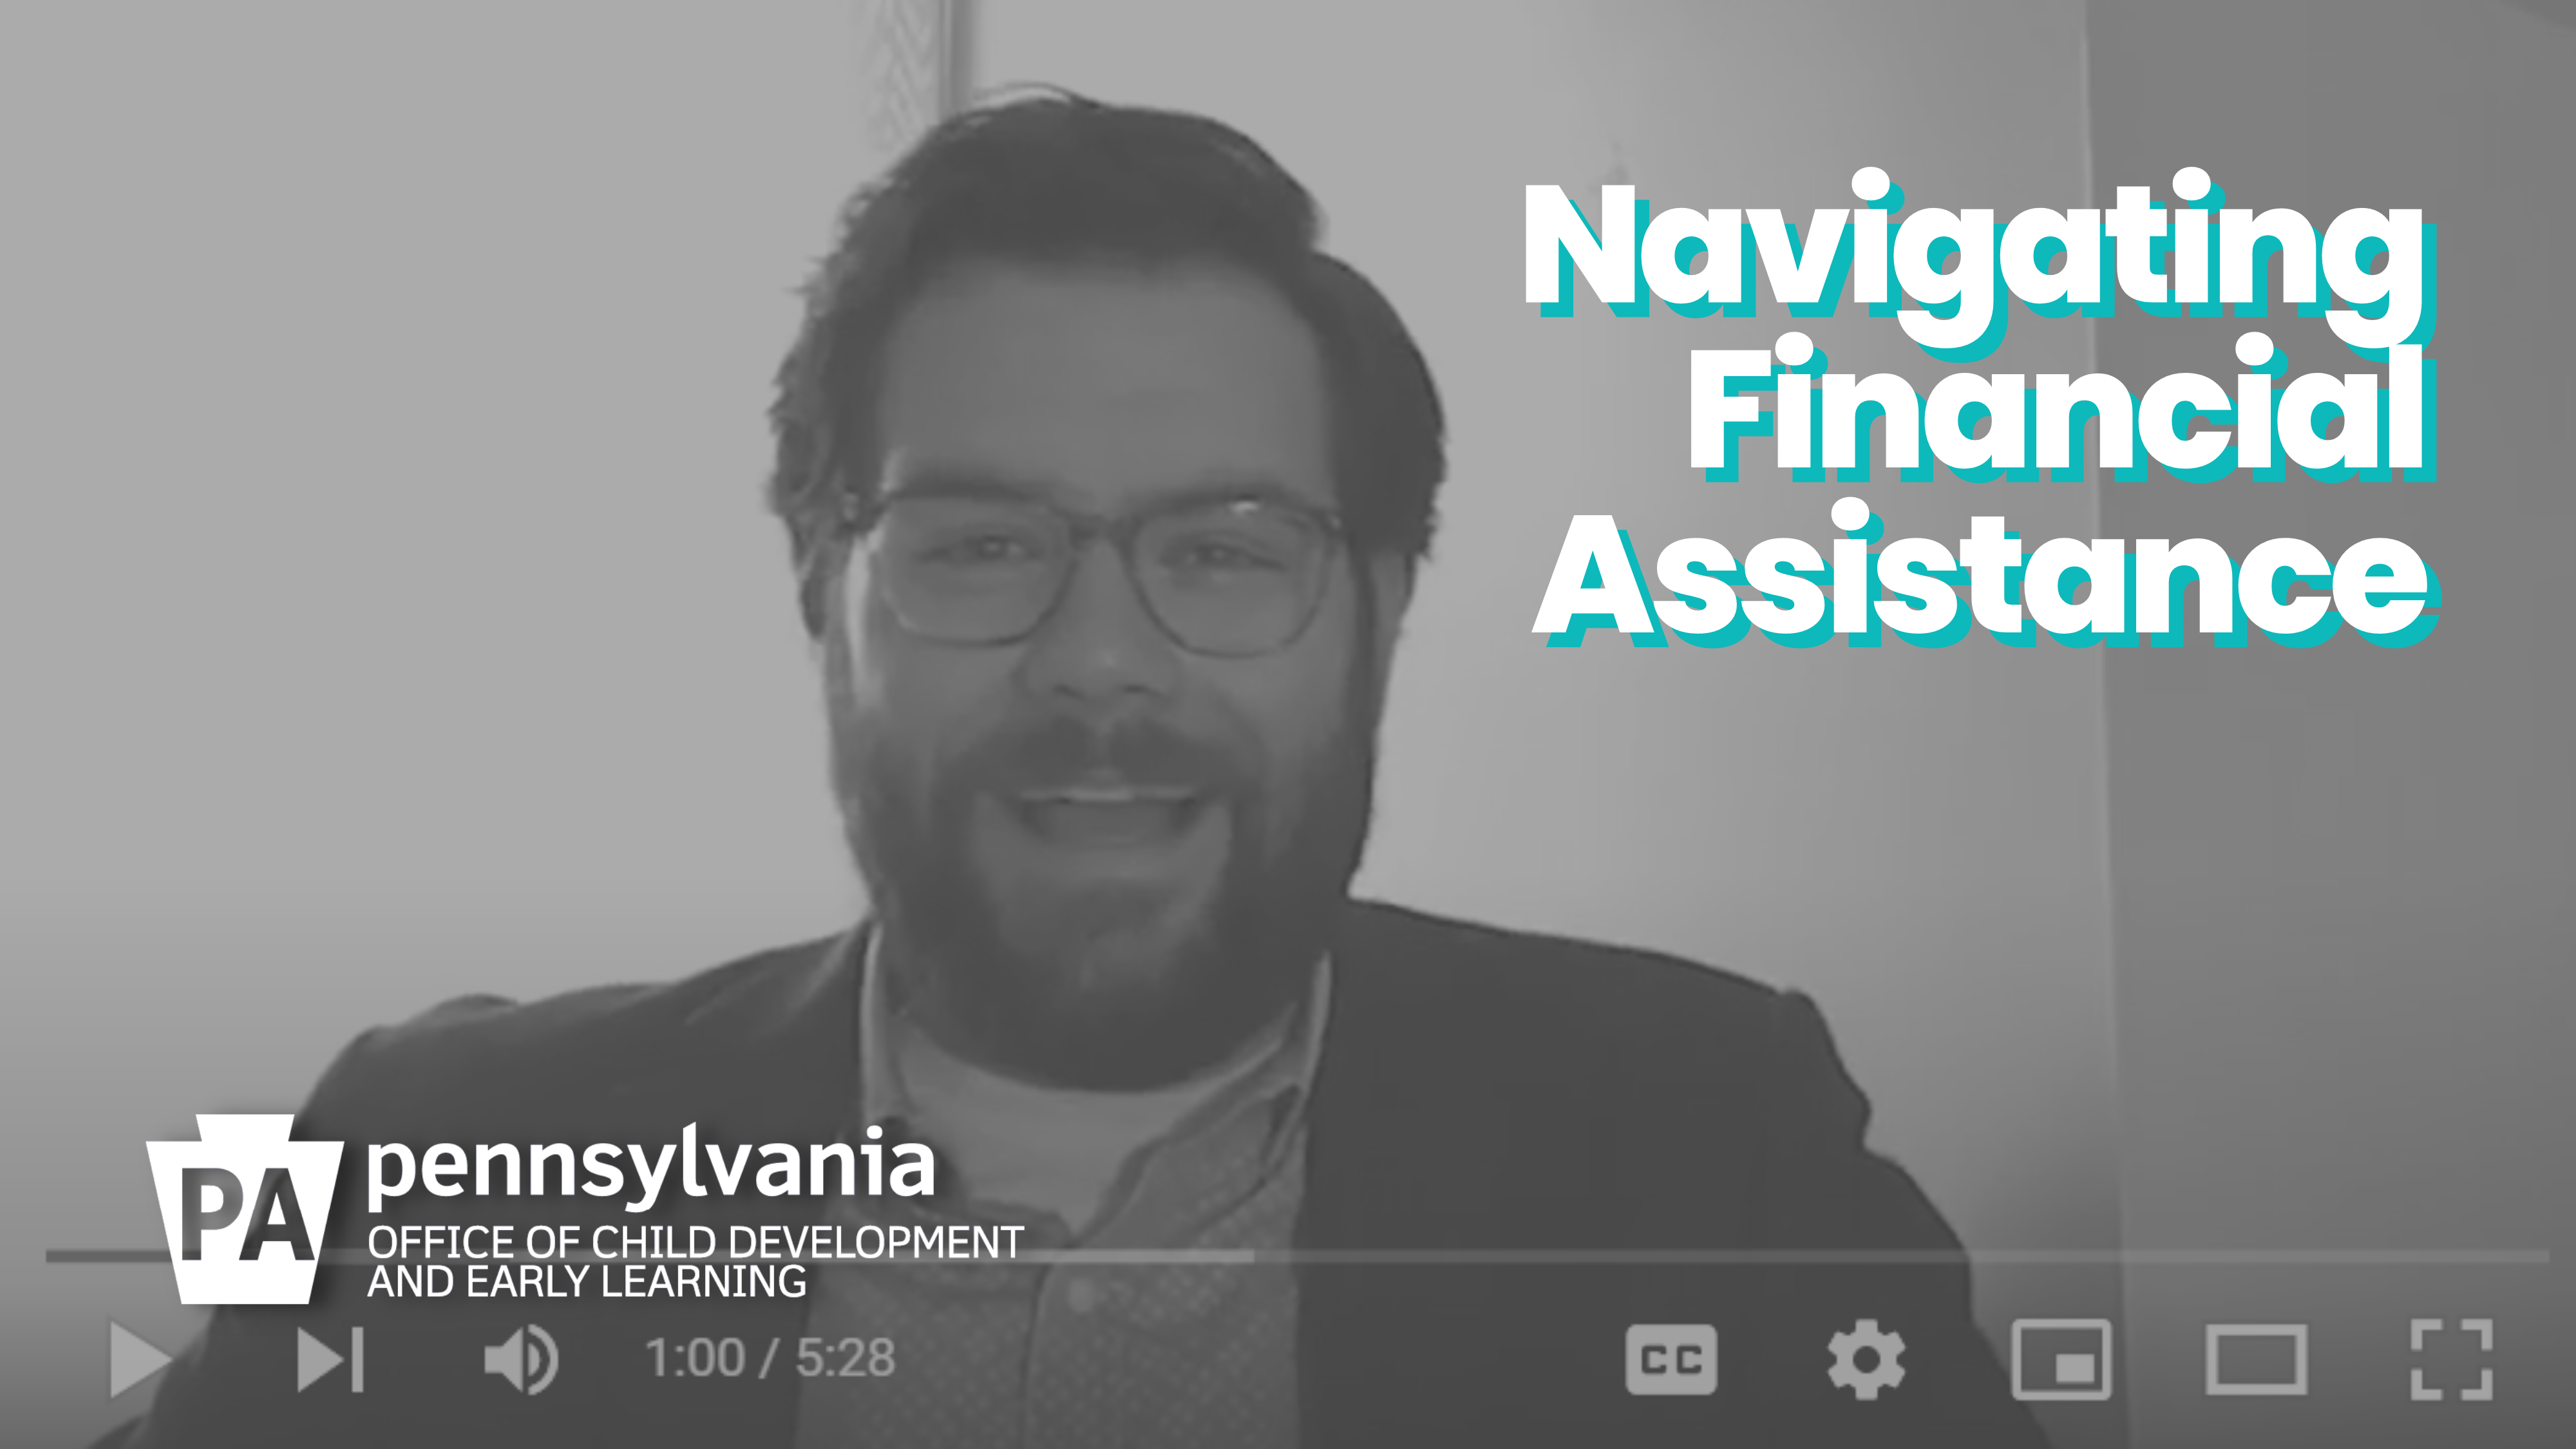 A man in black and white surrounded by the words "Navigating Financial Assistance" and a white version of the OCDEL logo.